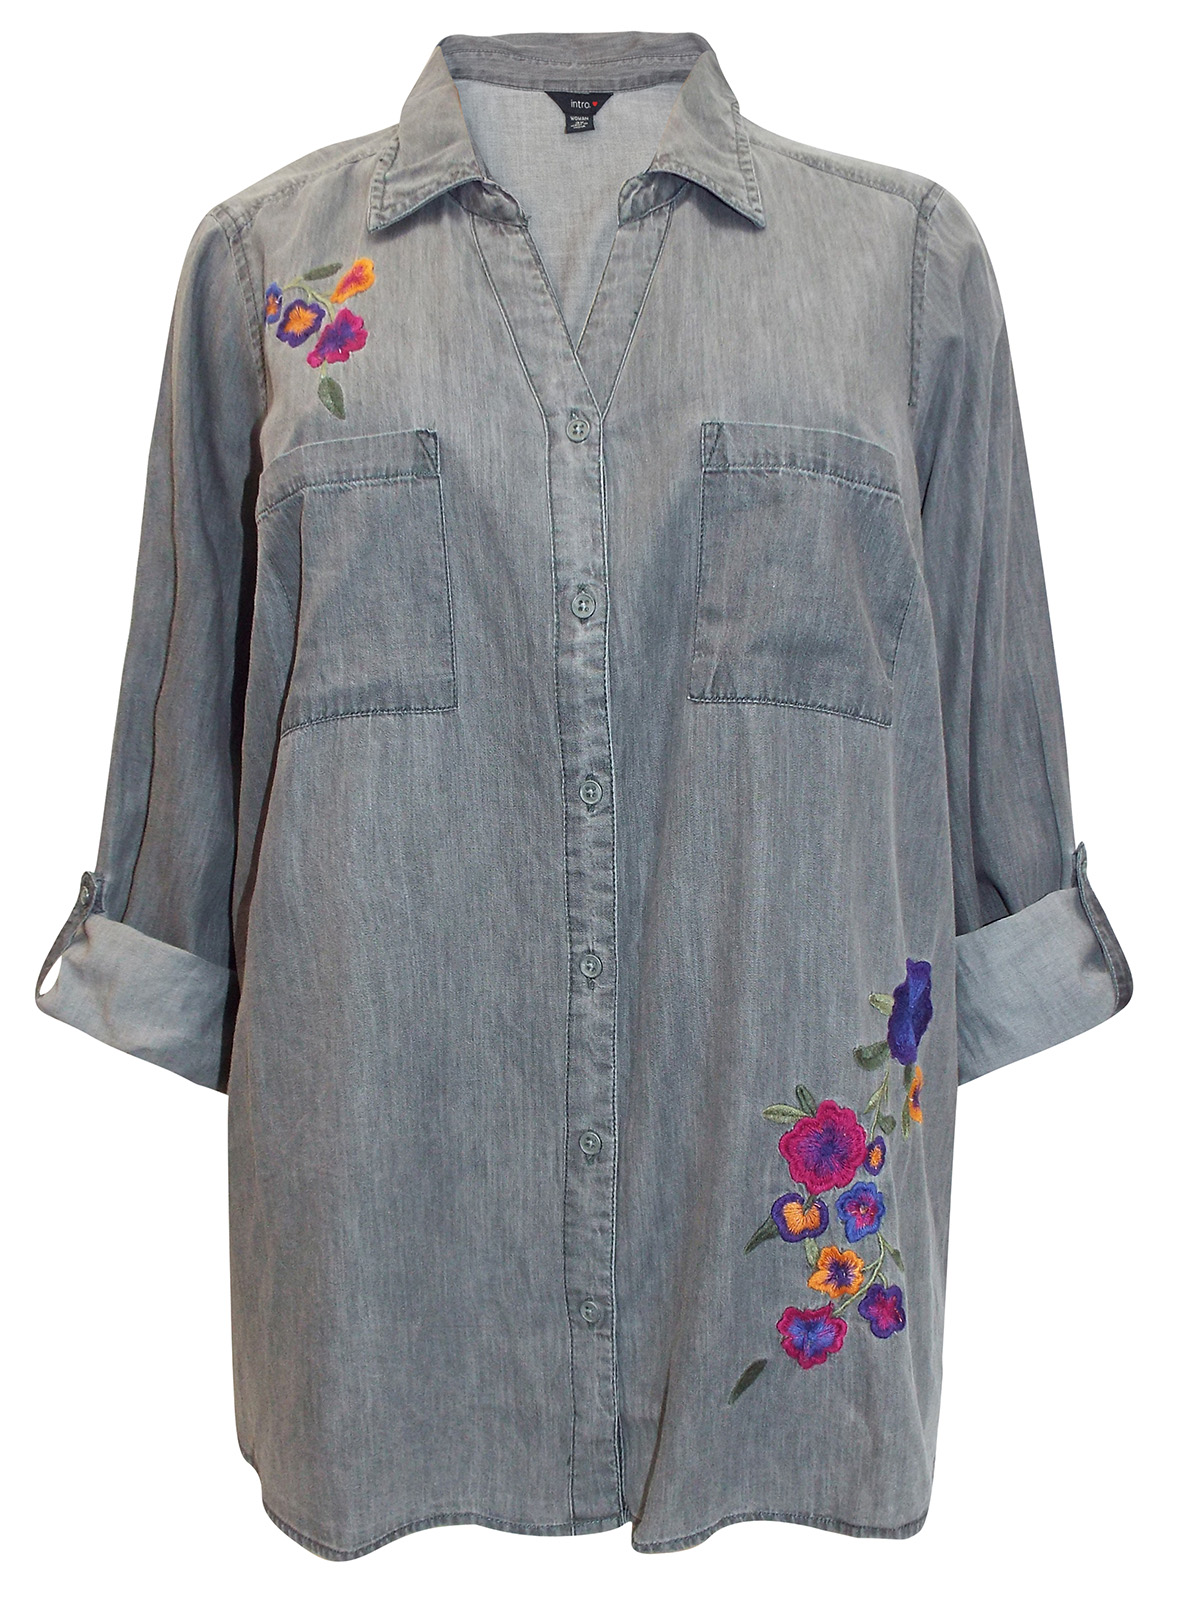 Intro - - Intro GREY Floral Embroidered Dipped Hem Denim Shirt - Plus ...